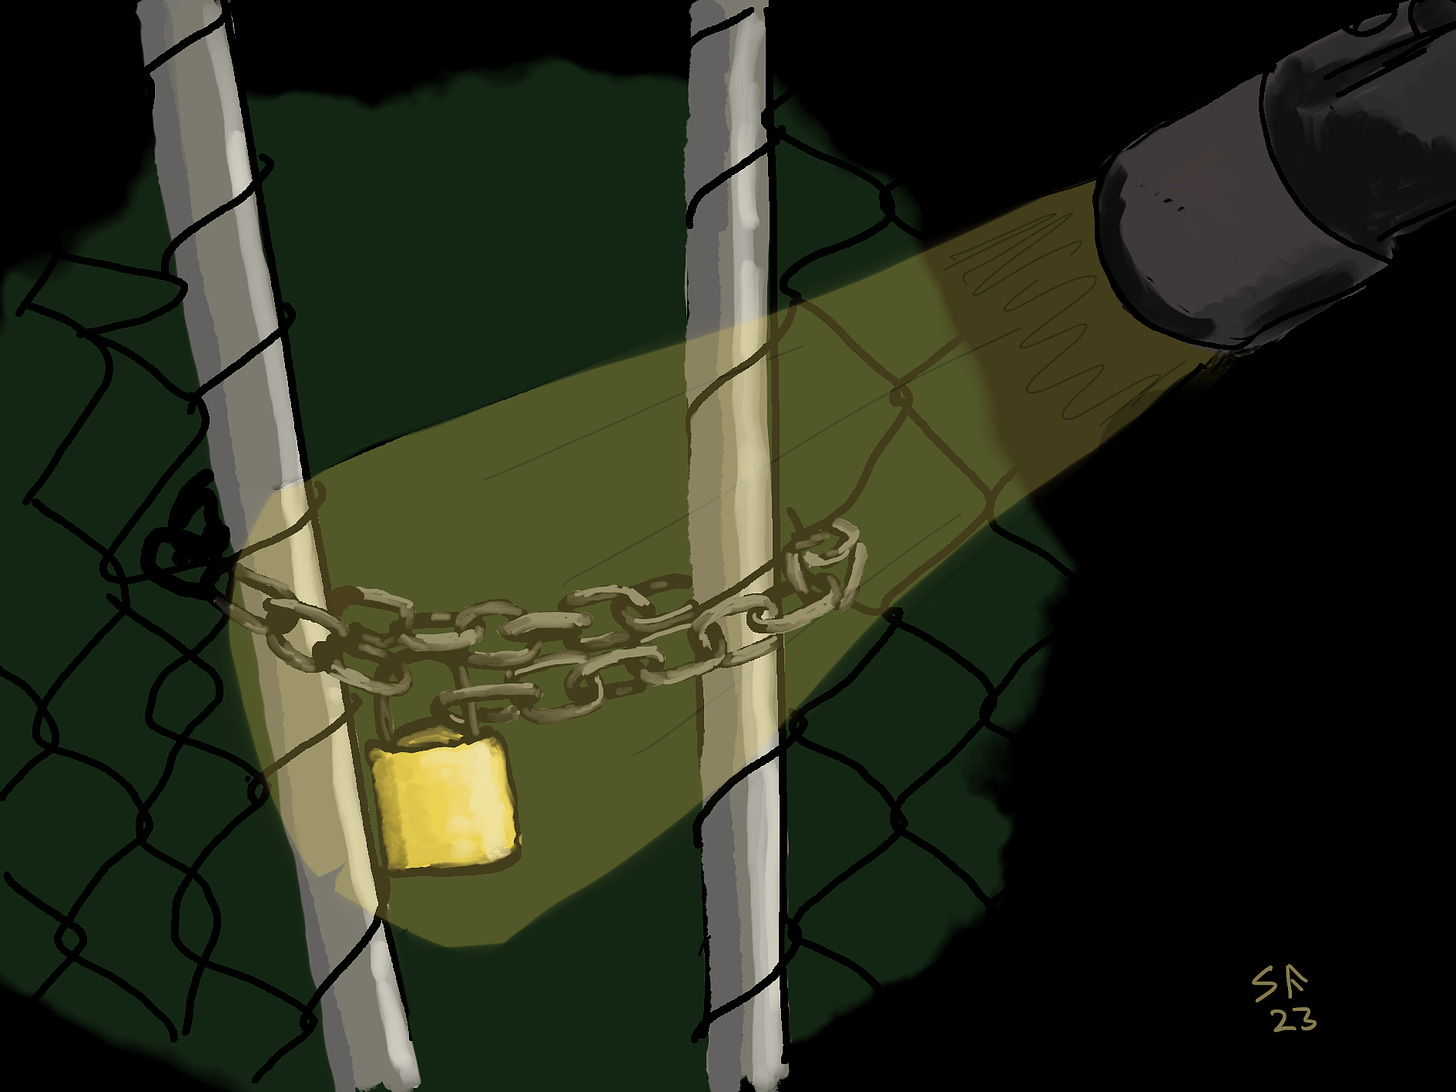 Cartoon: the beam of a torch illuminates a wire gate, chained and padlocked